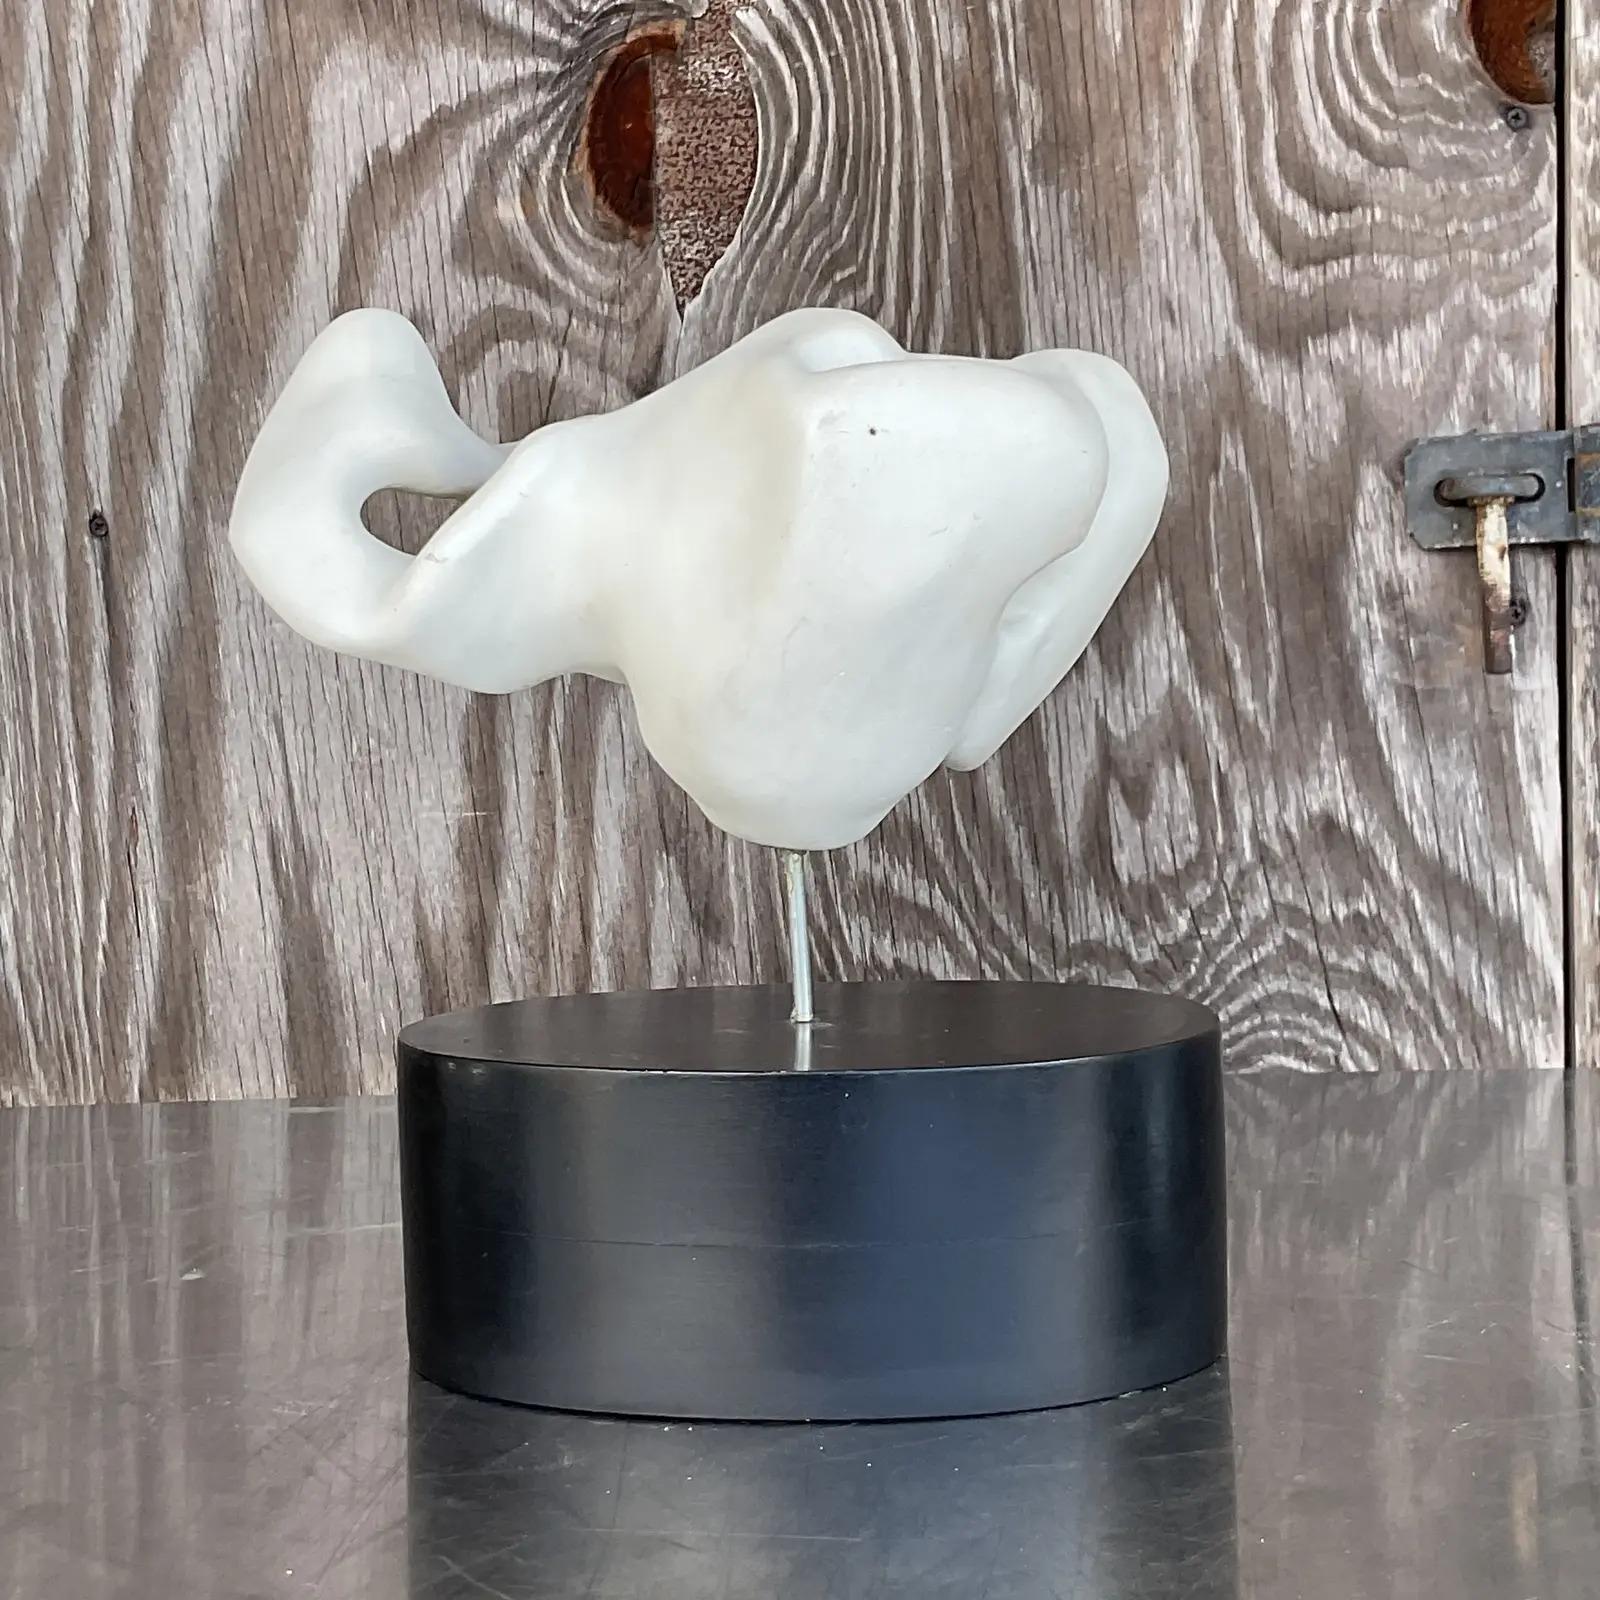 A fantastic vintage abstract sculpture. A plaster composition of a biomorphic shape in bright white. Stands on a black plinth and initialed by the artist. Acquired from a Palm Beach estate.